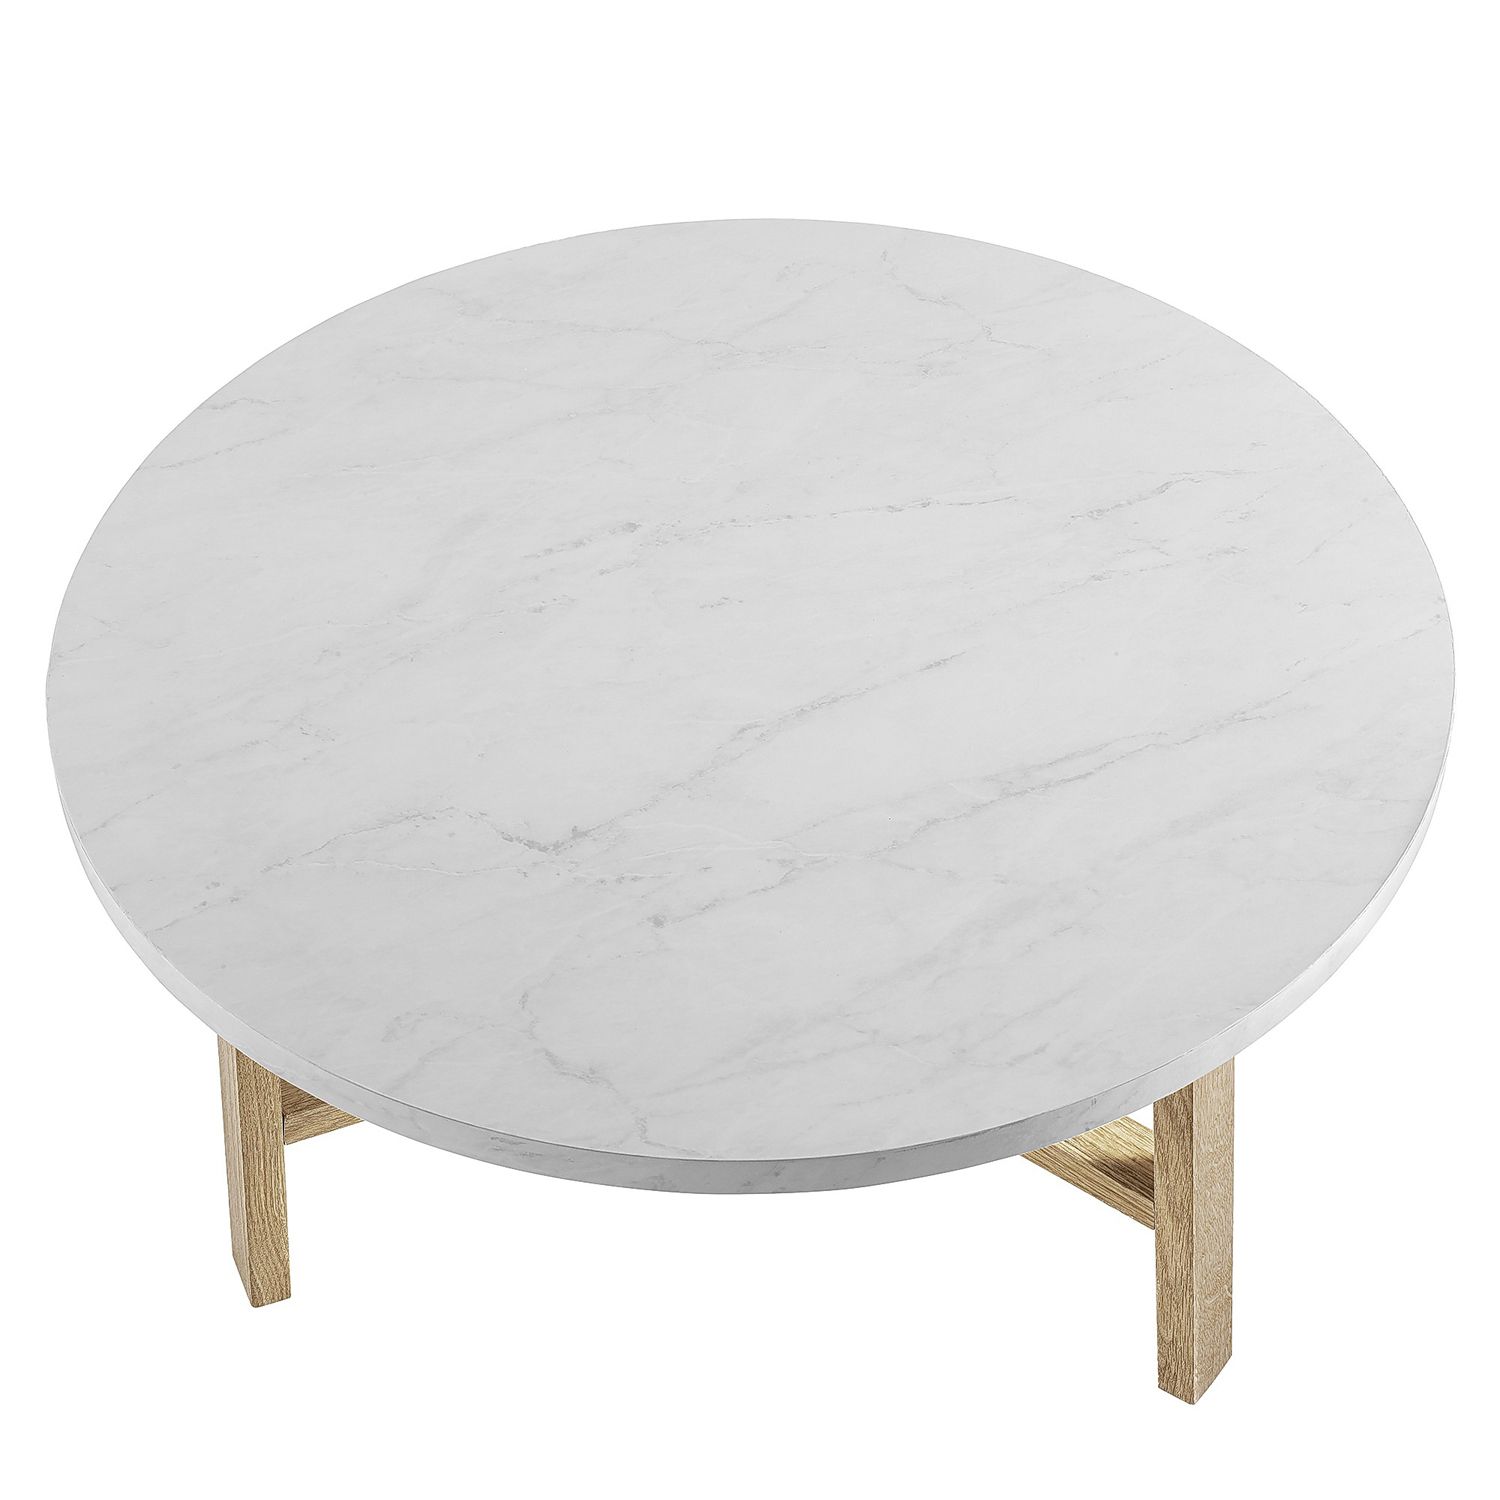 Modern White Faux Marble Round Coffee Table – Pier1 With Modern Round Faux Marble Coffee Tables (Gallery 6 of 20)